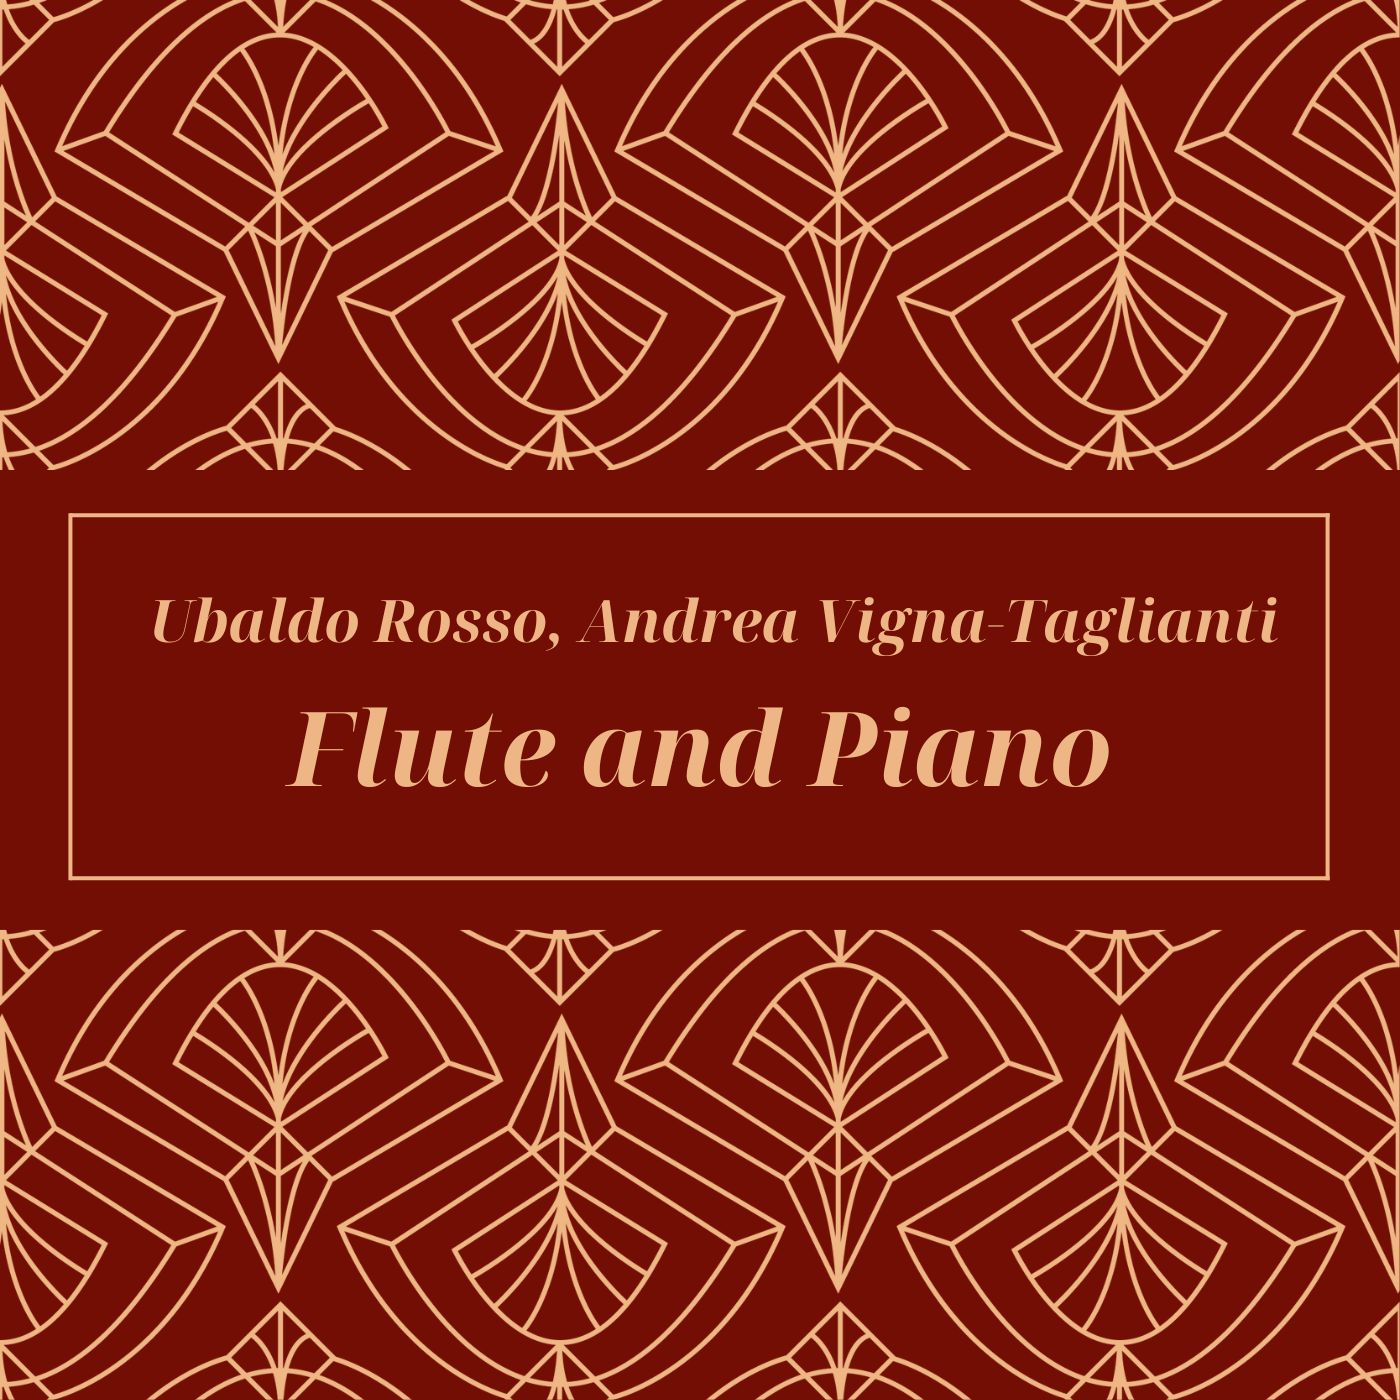 Flute and Piano